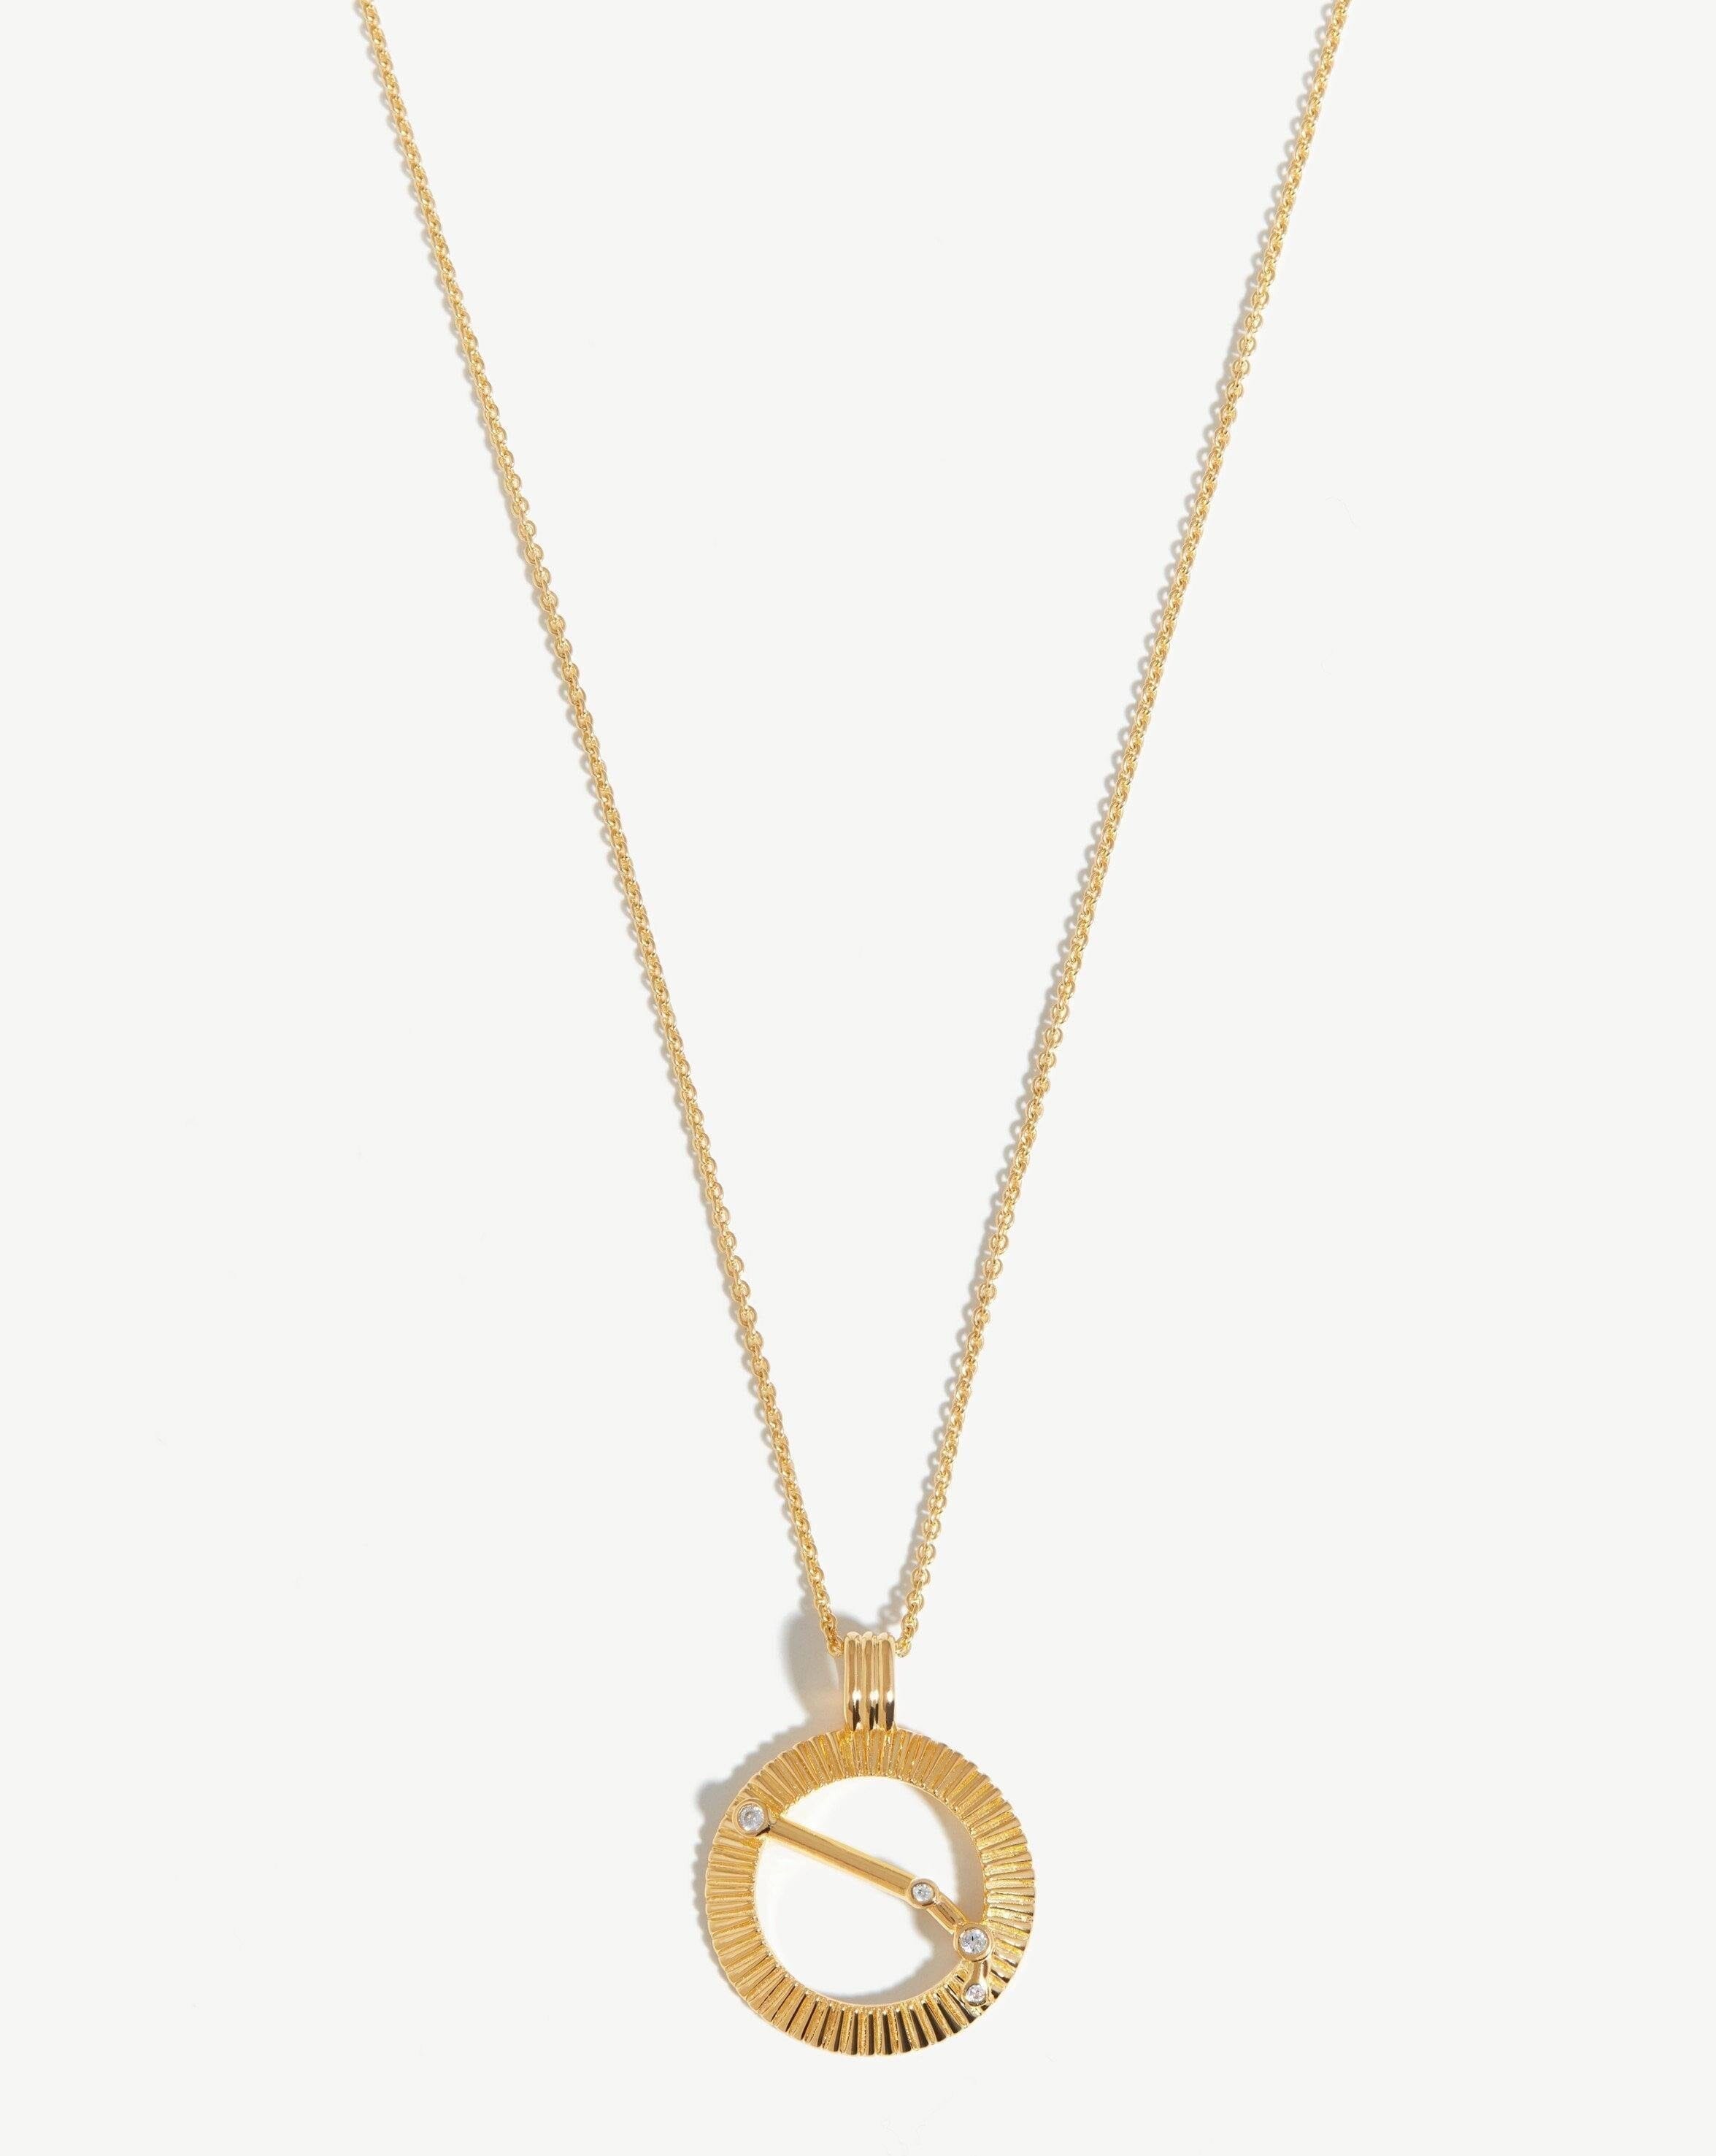 Zodiac Constellation Pendant Necklace - Aries 18ct Gold Plated Vermeil/Aries Necklaces Missoma 